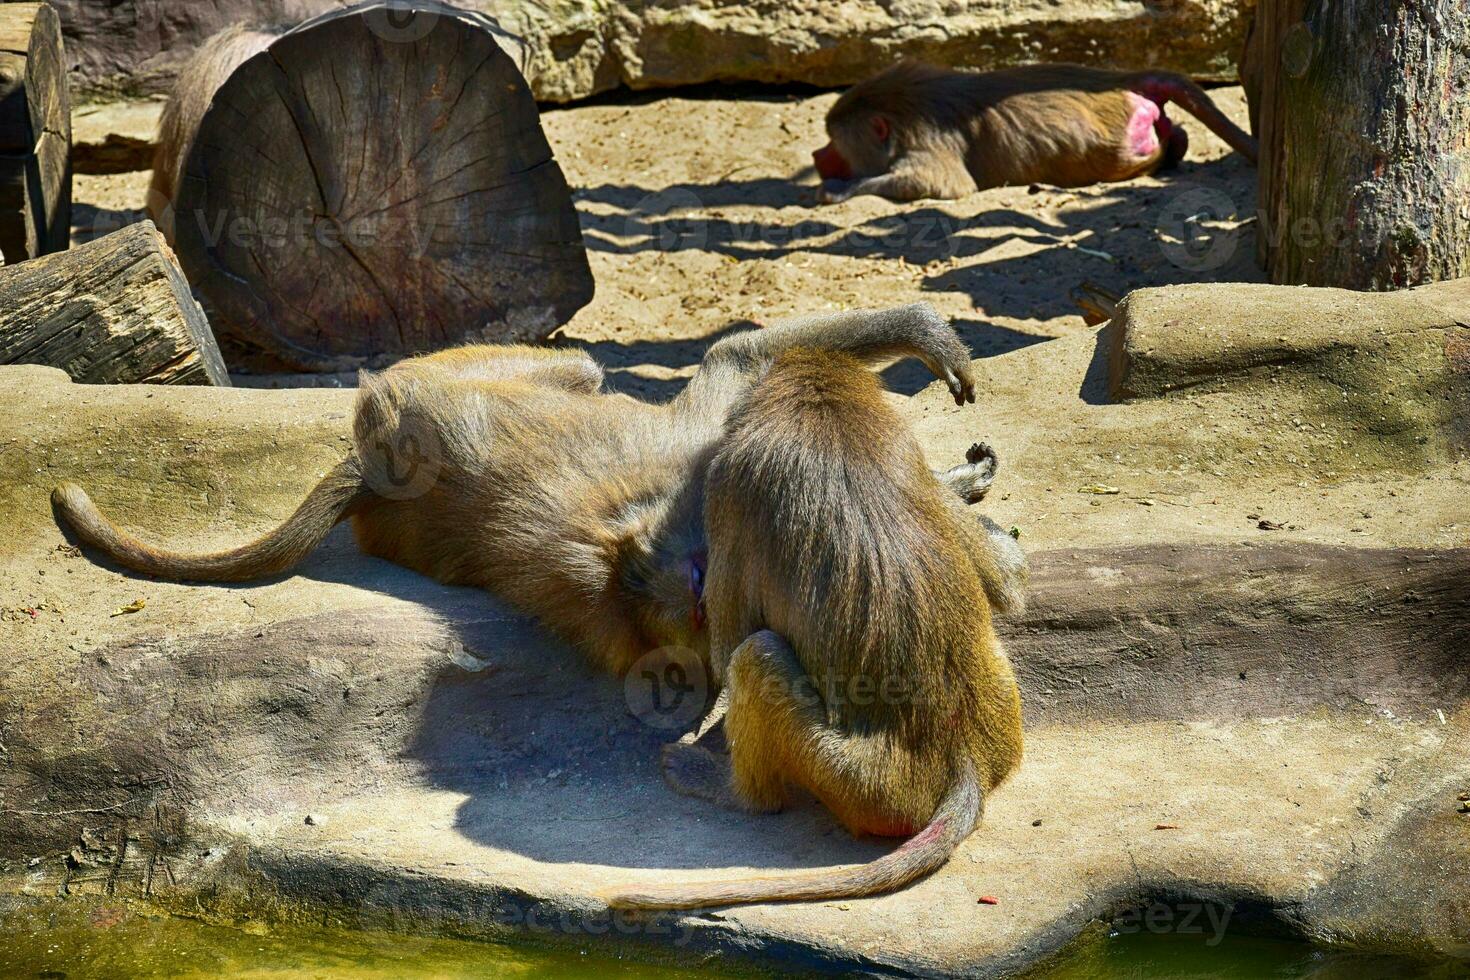 monkey animals at the zoo on a warm summer day outside photo